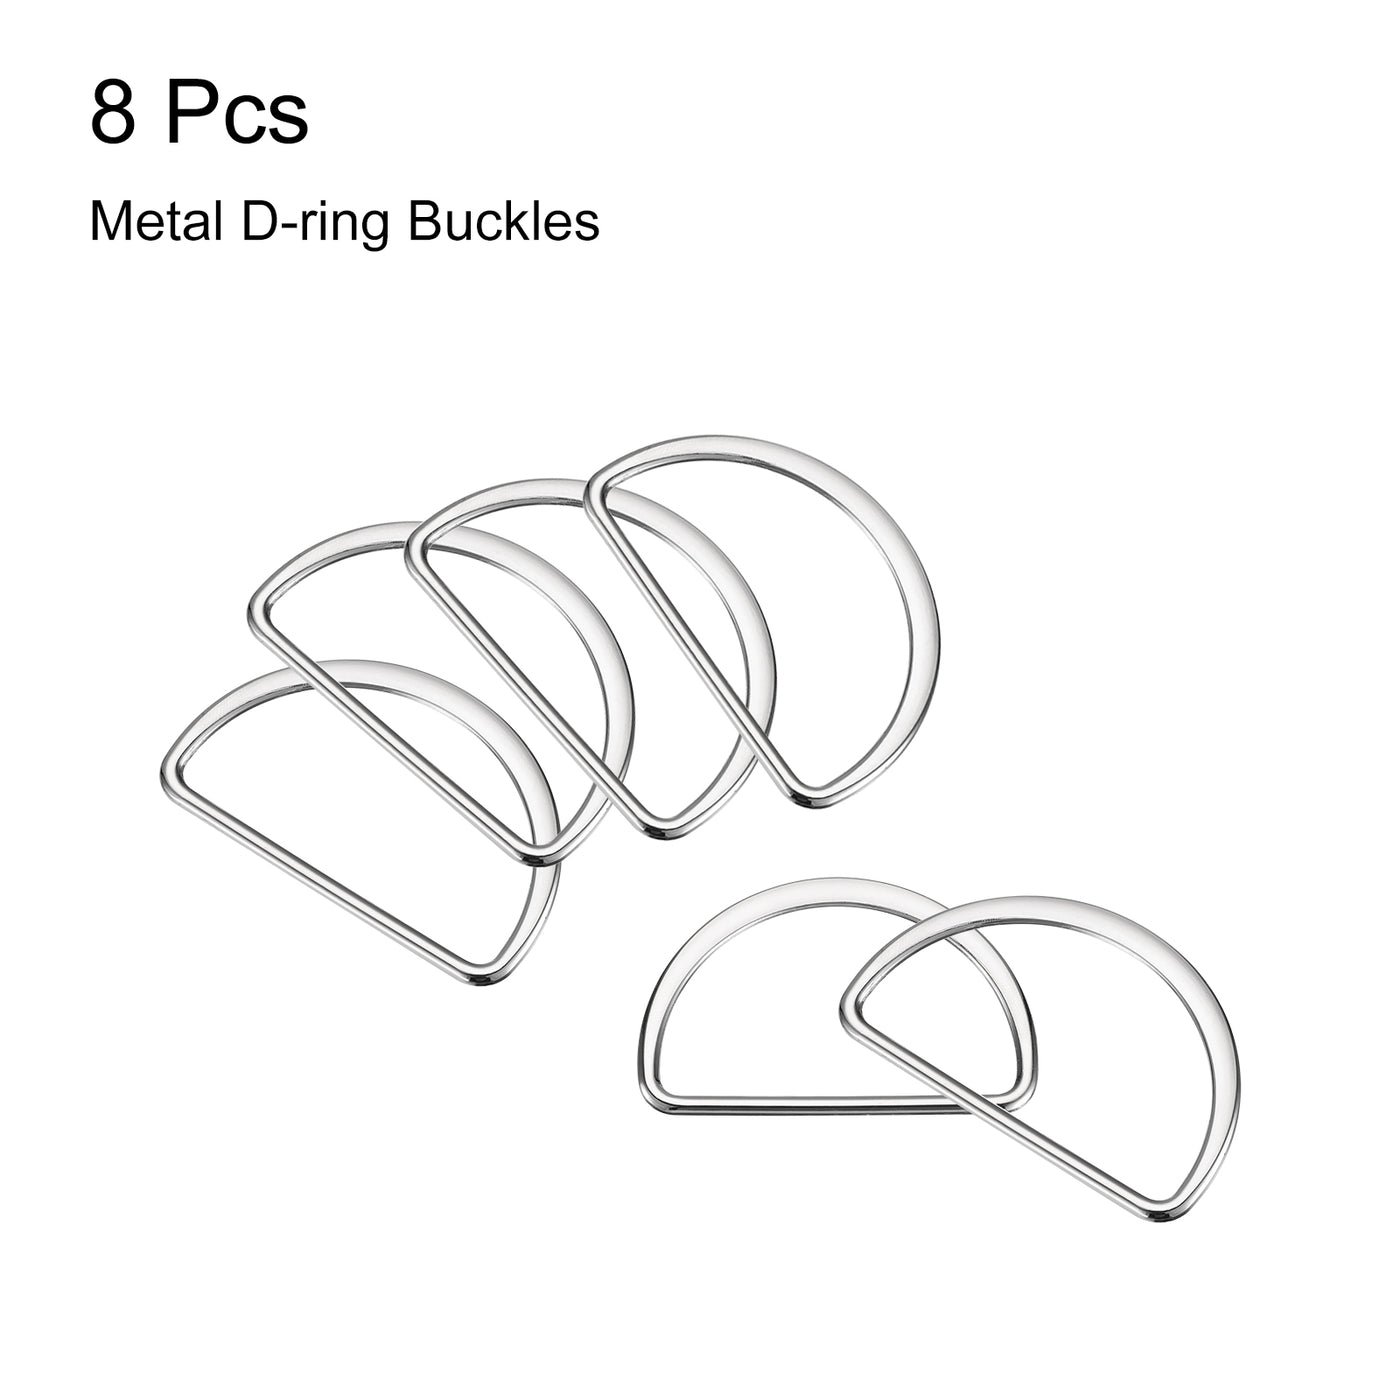 uxcell Uxcell Metal D-rings Buckle, Welded D-Rings Buckle for Webbing Sewing Clothing Straps Bags Belt DIY Accessories